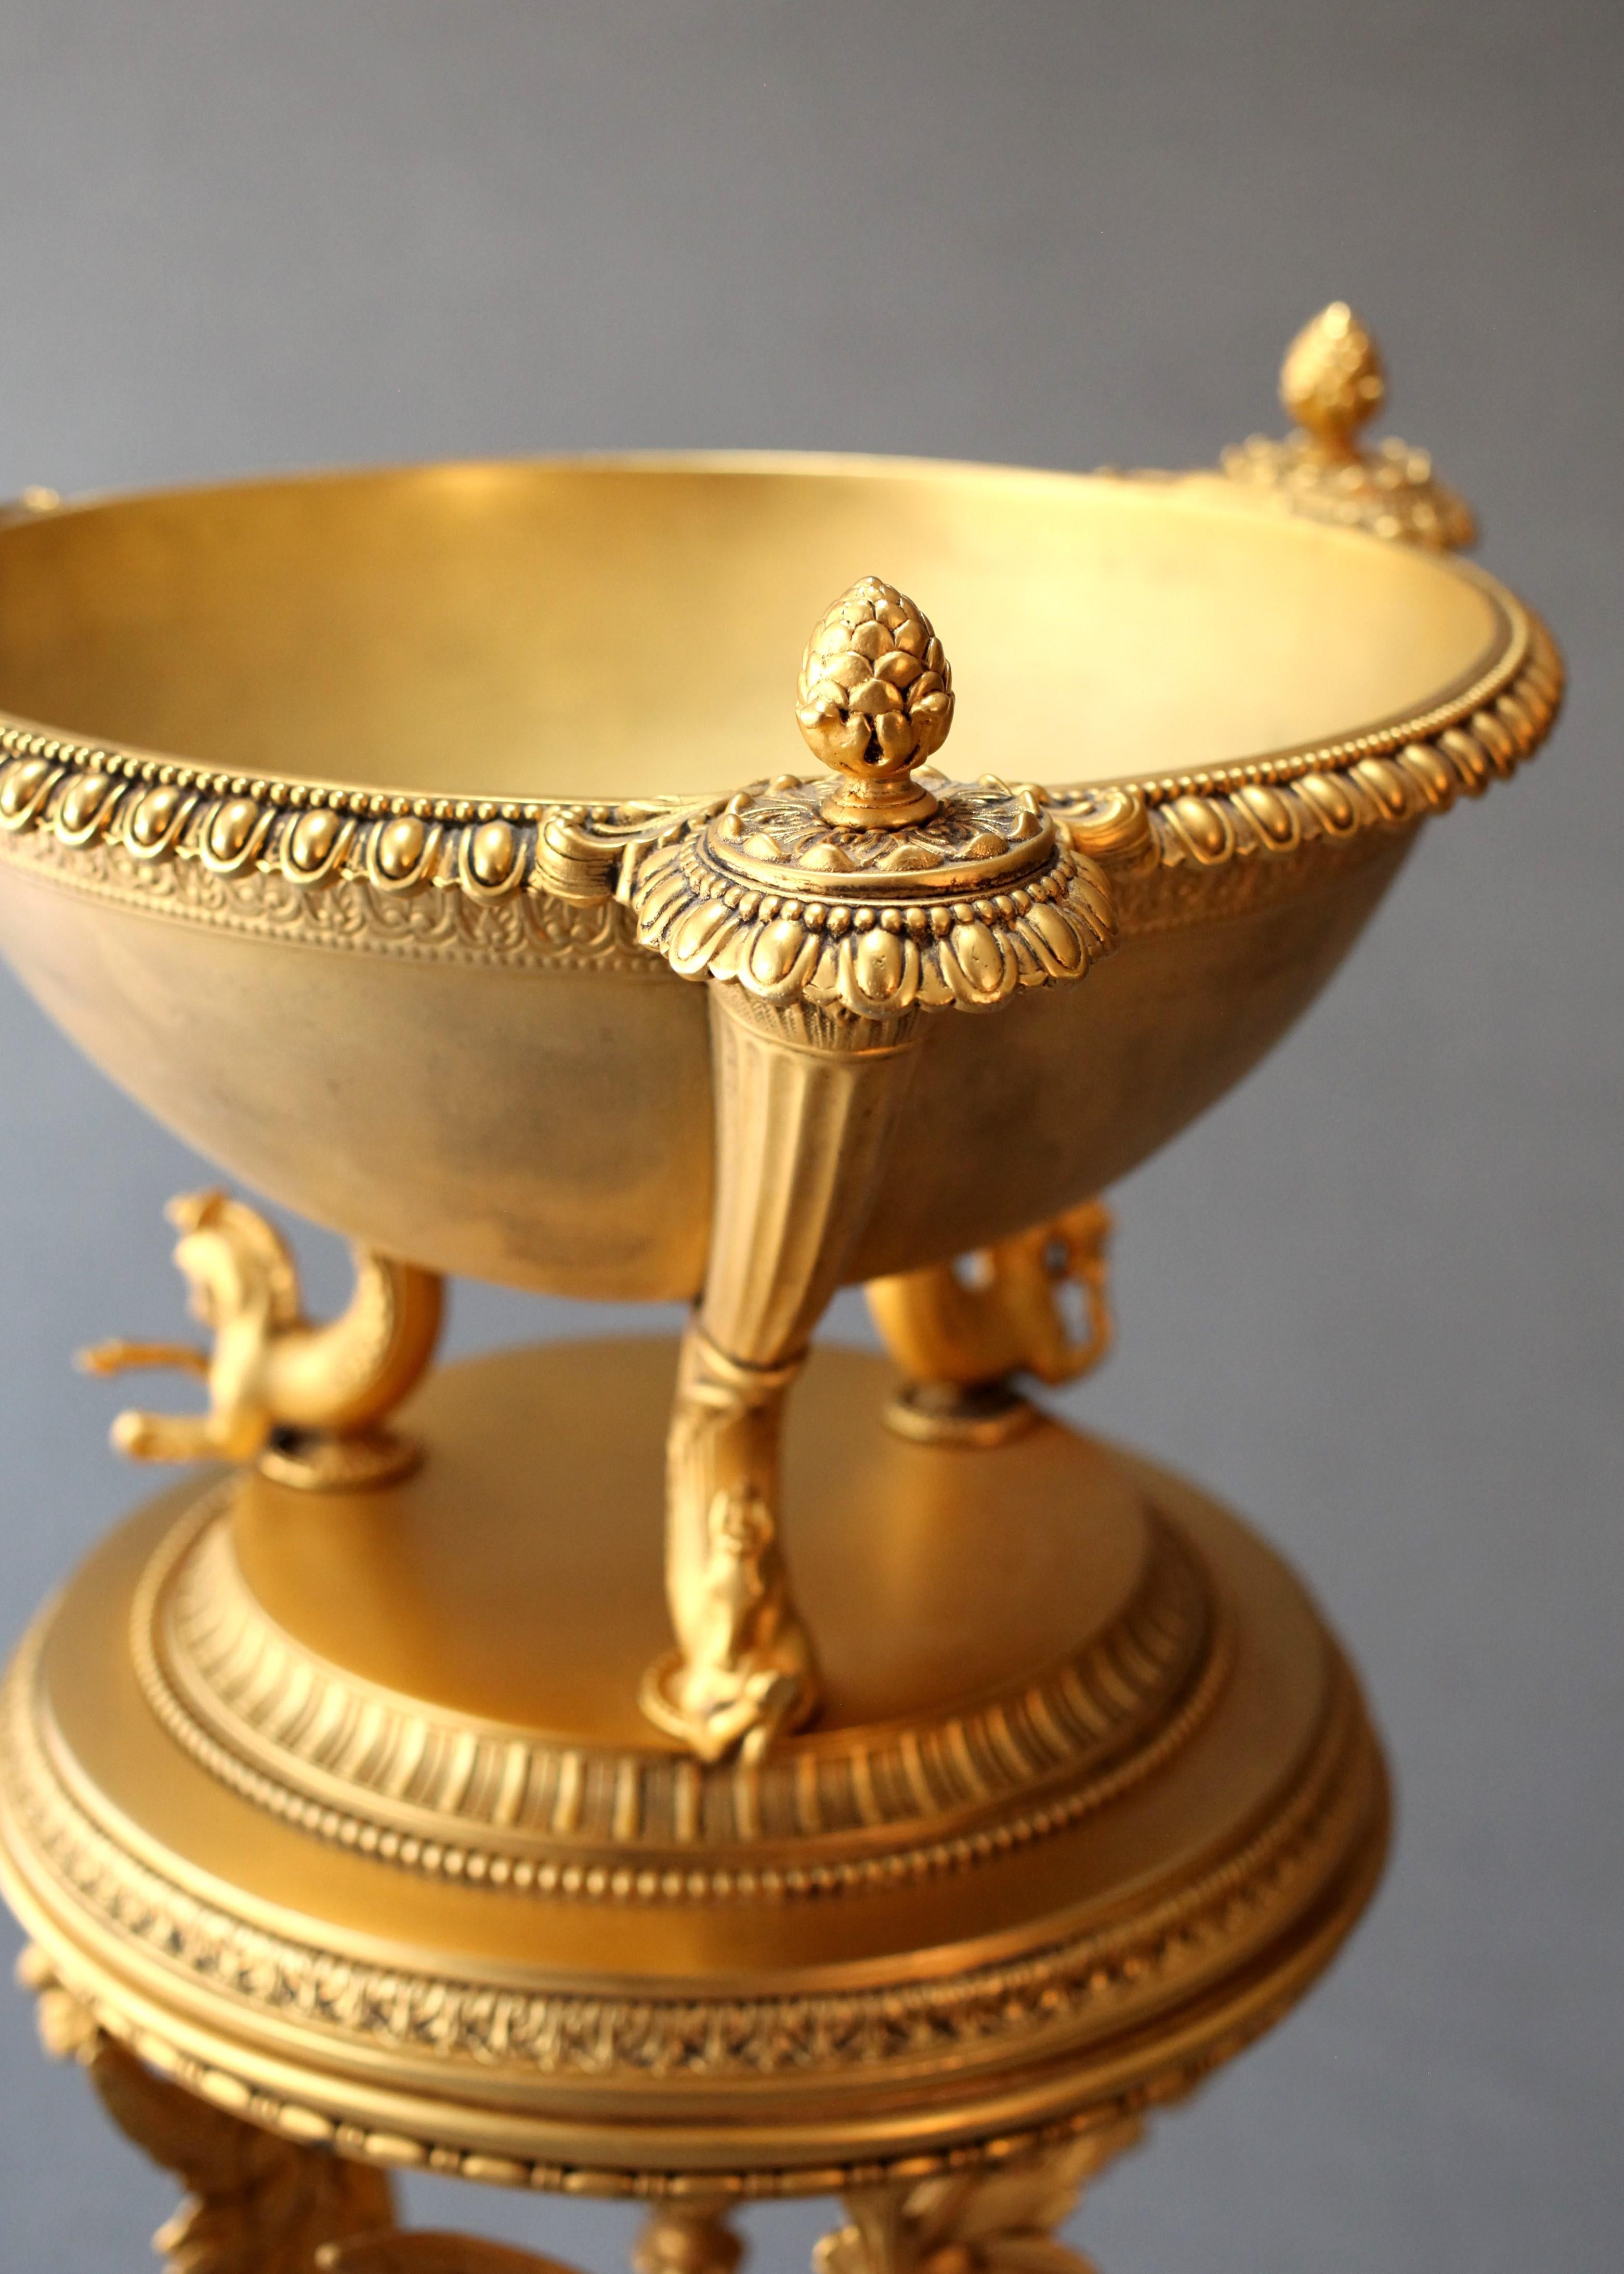 American Antique Louis XVI Style Gilt Bronze Athénienne Compote By Meridan Brittania Co For Sale